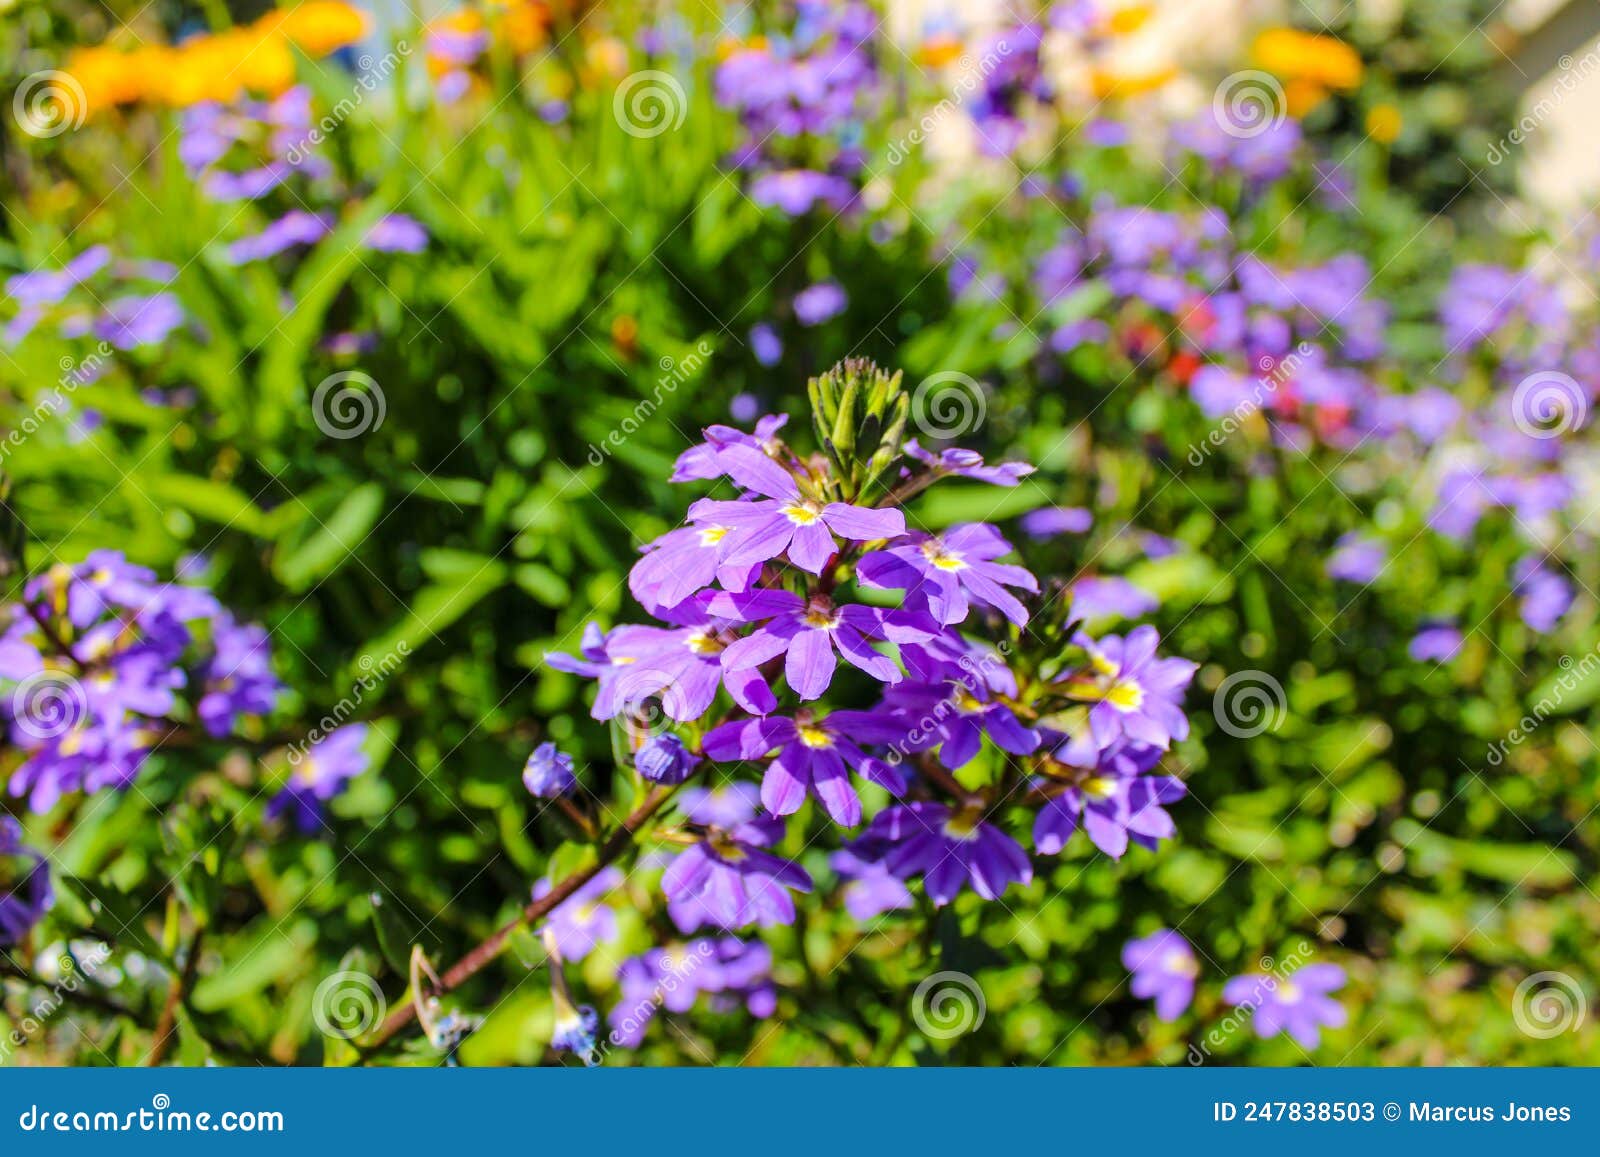 A Purple and Yellow Fan Flower Scaevola Aemula, Also Known Simply As ...